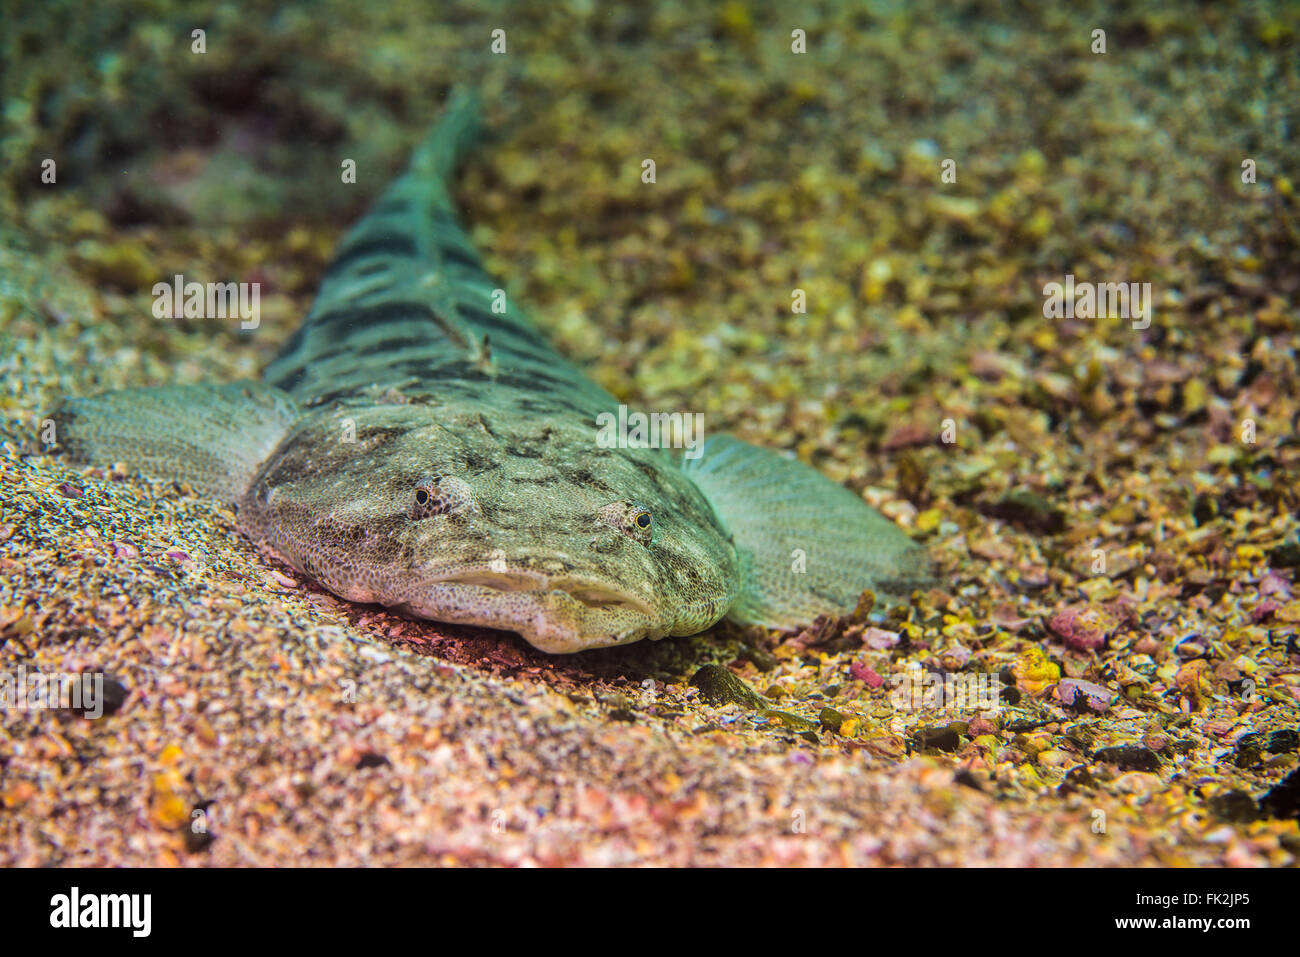 Bartail flathead. It's on the sandy  seabed. Depth 10m. Stock Photo